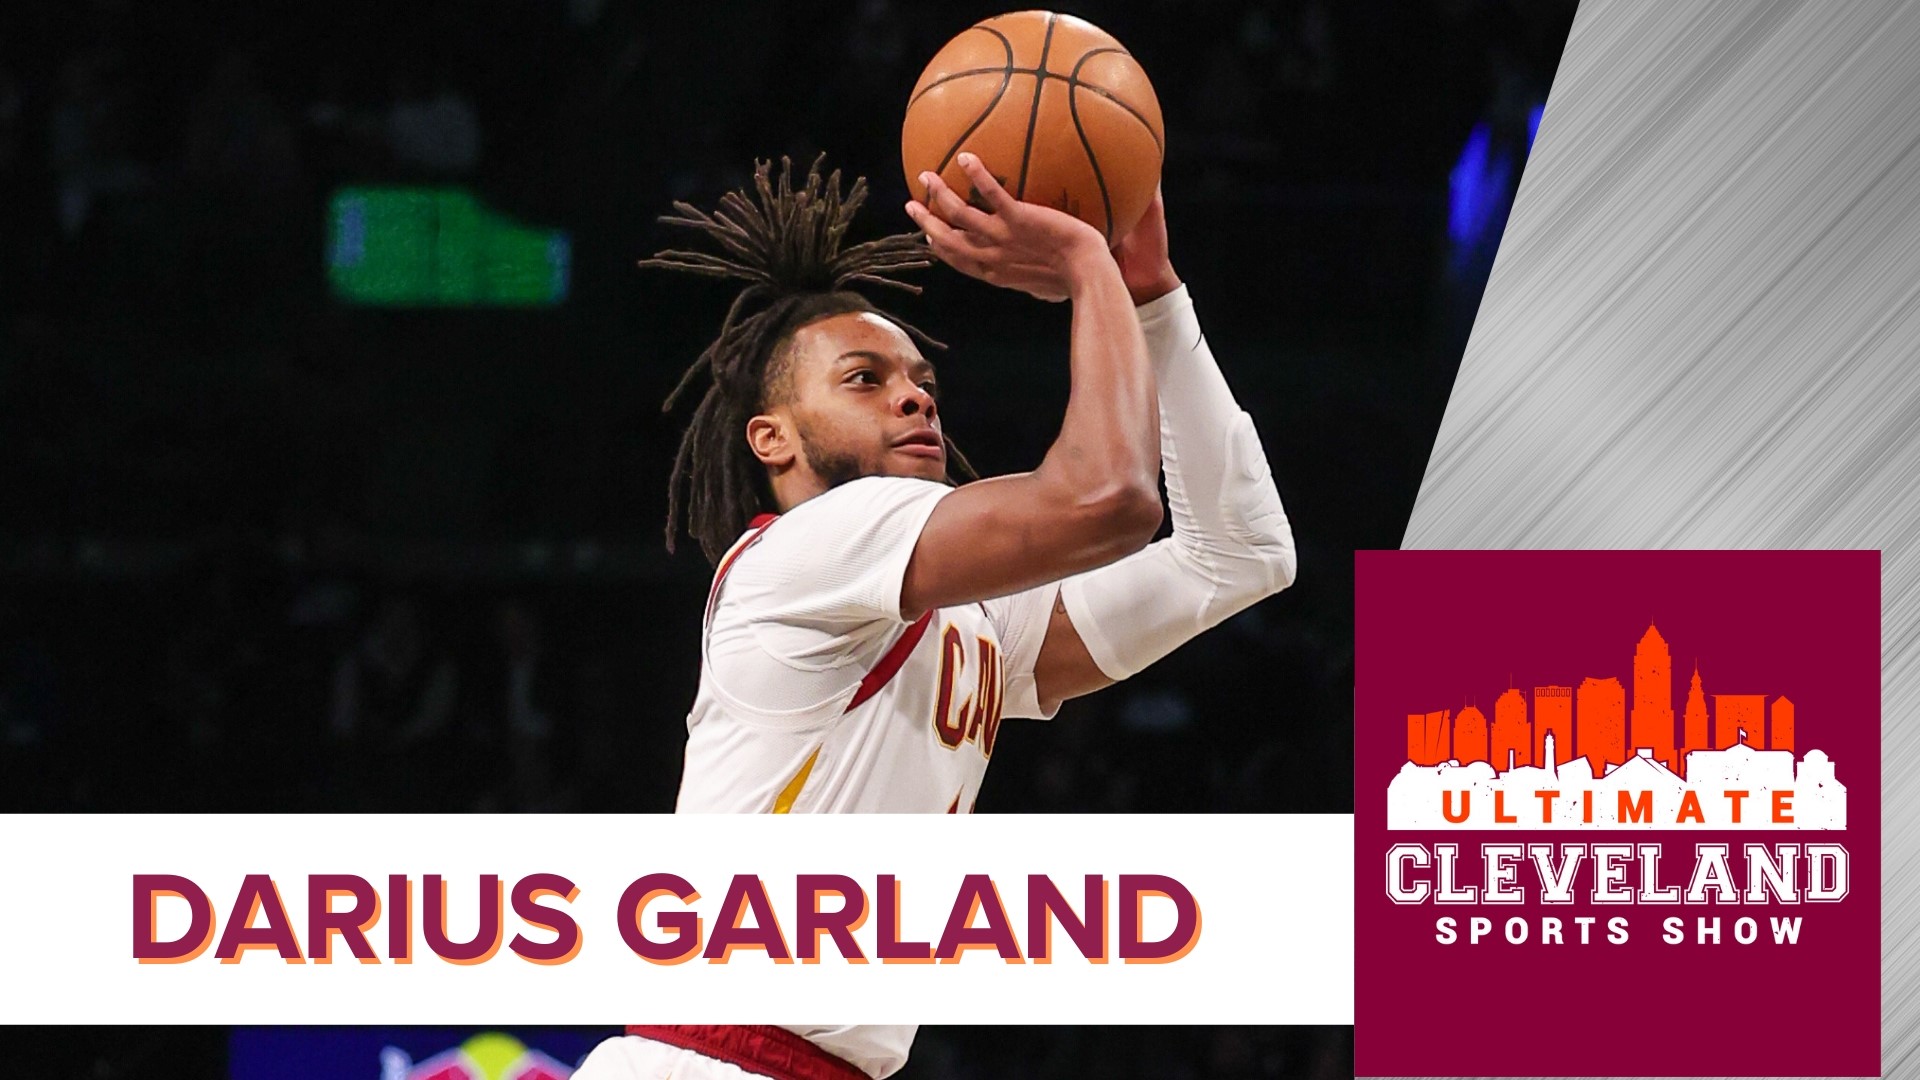 The guys discuss Darius Garland's GQ interview and how he's an all-around good guy for Cleveland